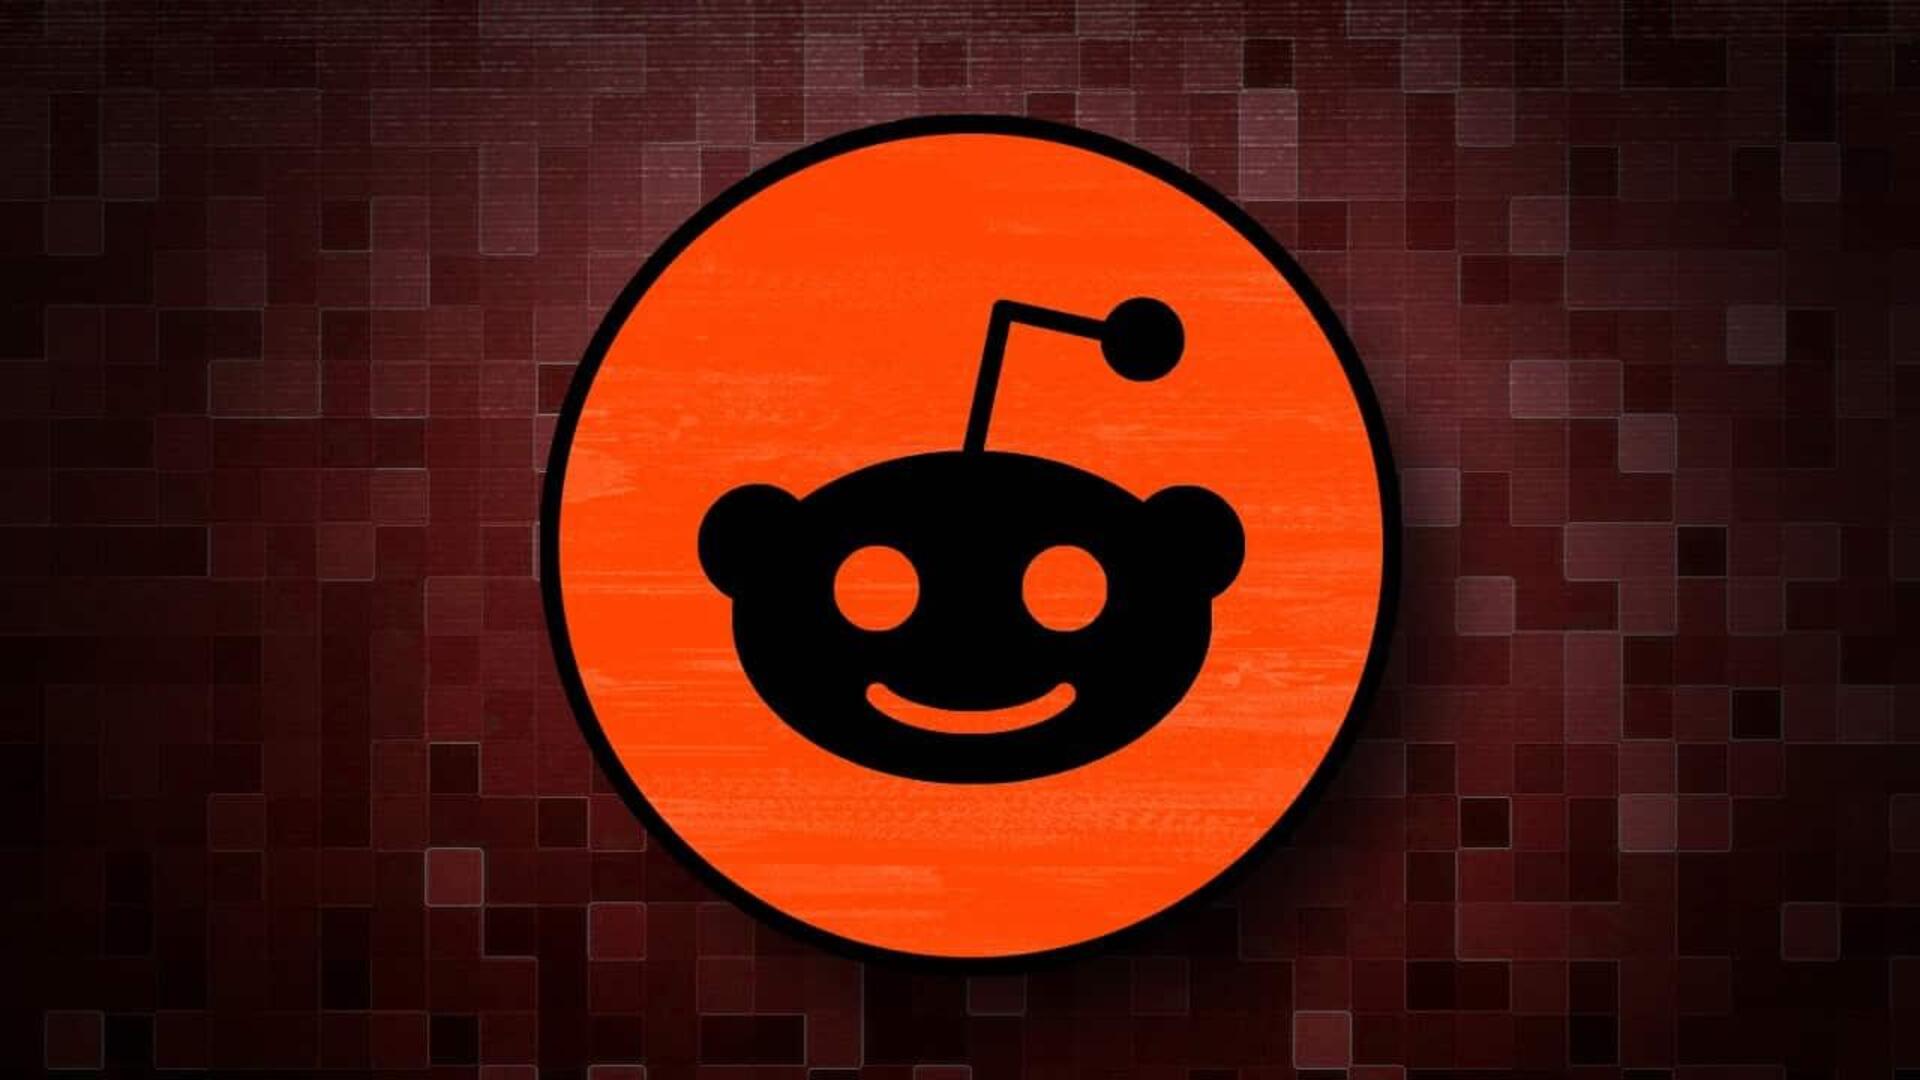 Reddit prices IPO at $34 per share to raise $748M